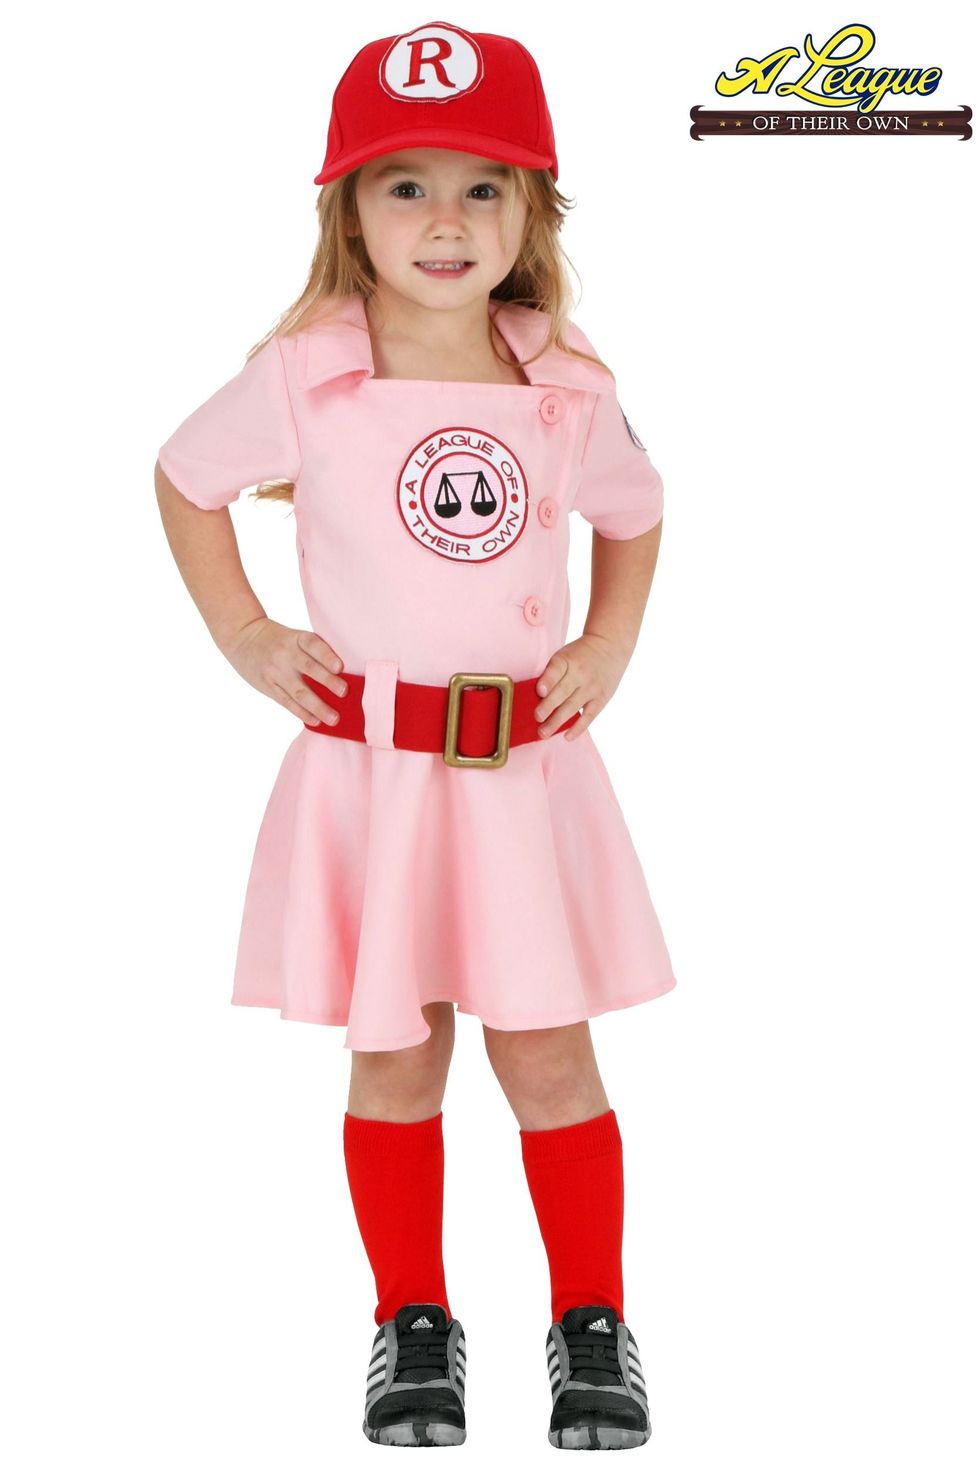 'A League of Their Own' Dottie Costume